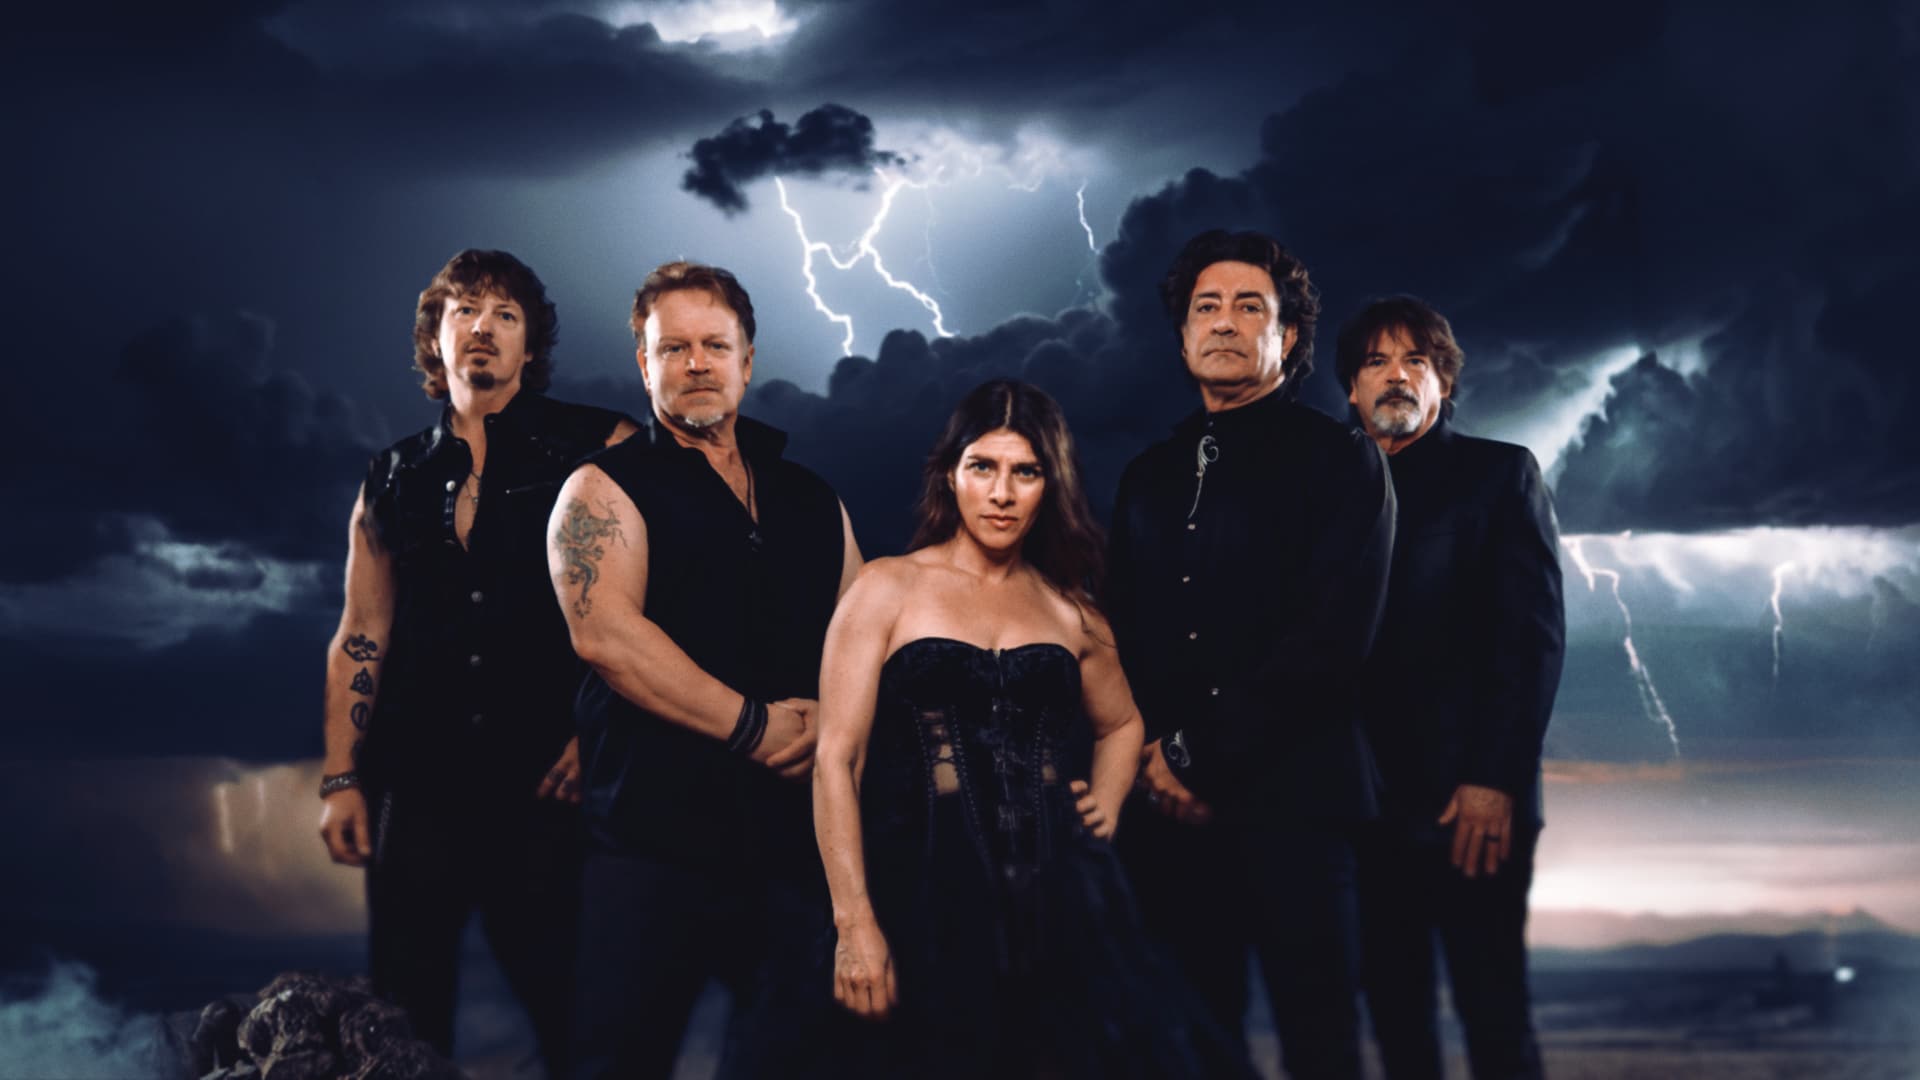 Band SD17 stands strong against a stormy backdrop symbolizing their defiant spirit in metal music.